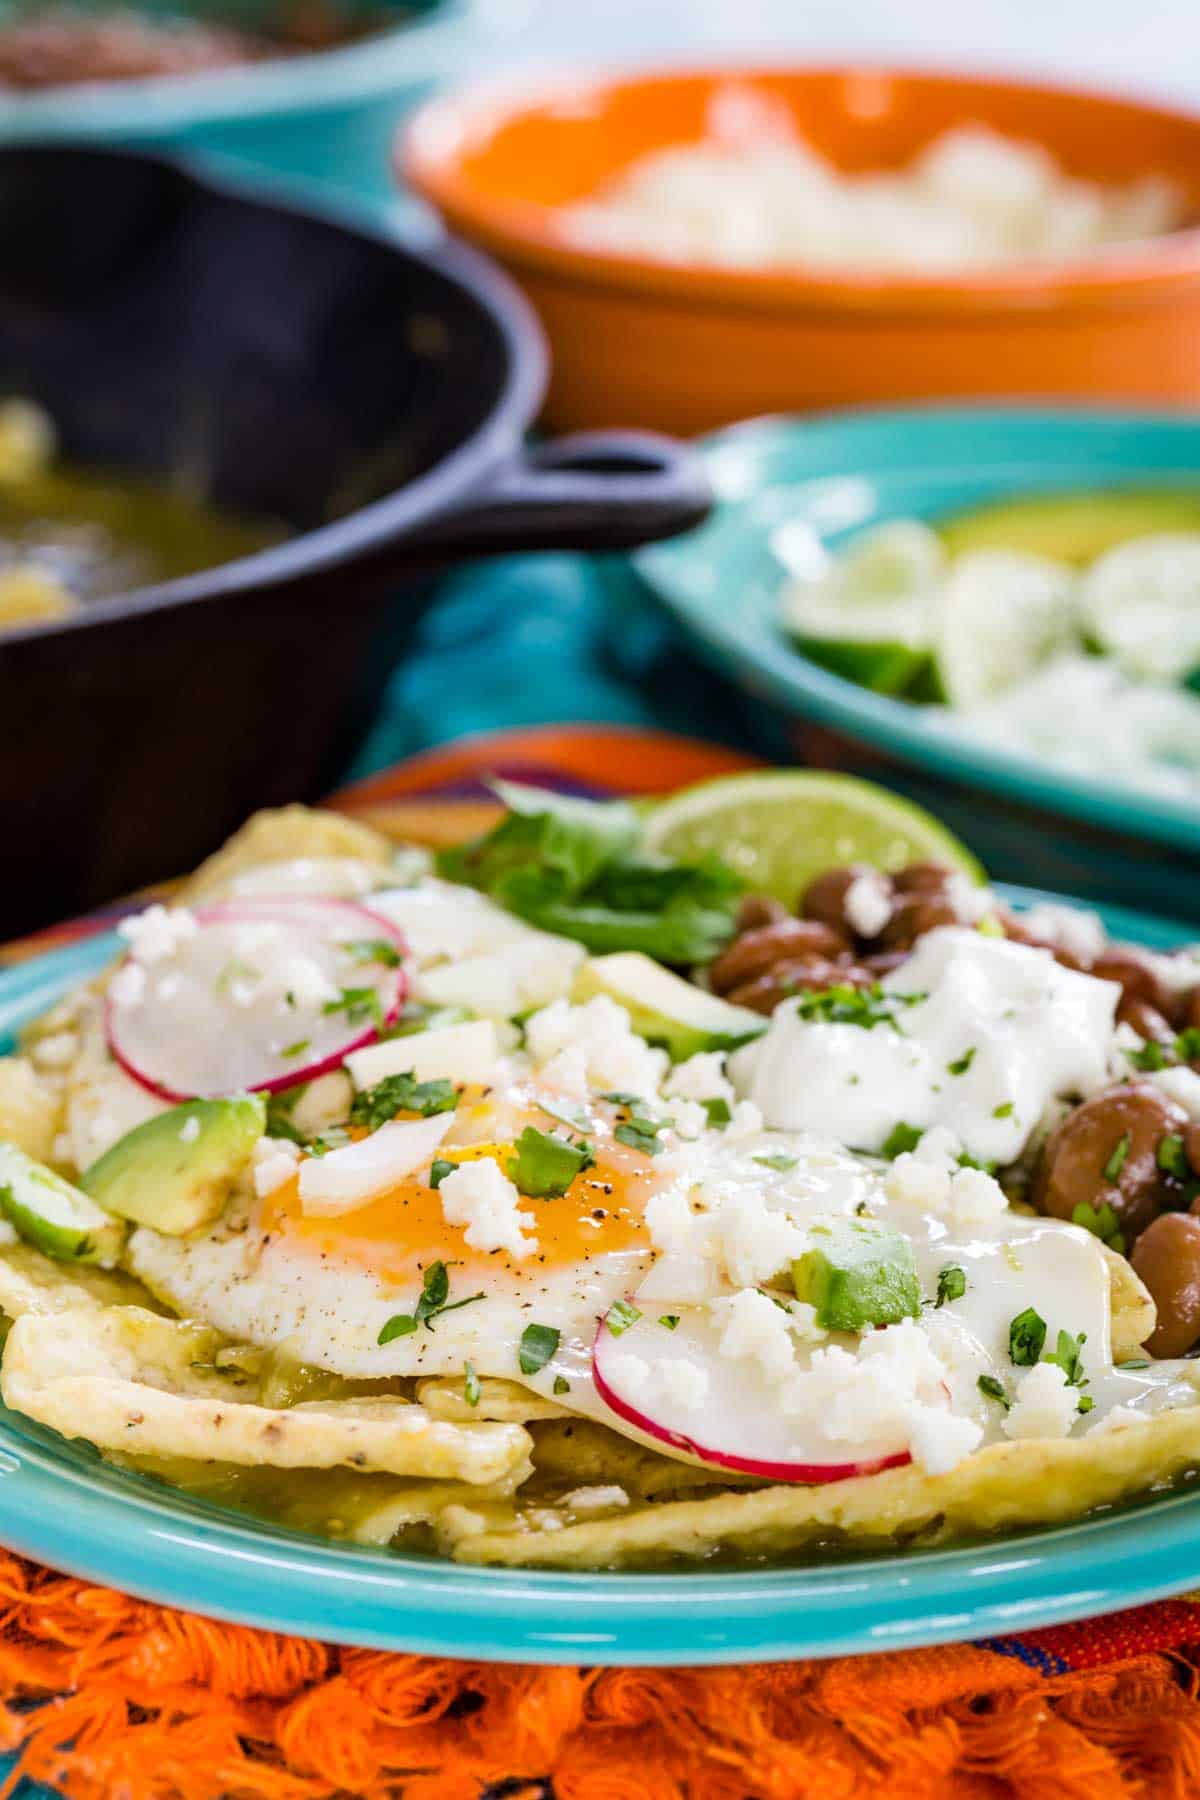 Chilaquiles verdes garnished with a fried egg and assorted toppings served on a blue plate.